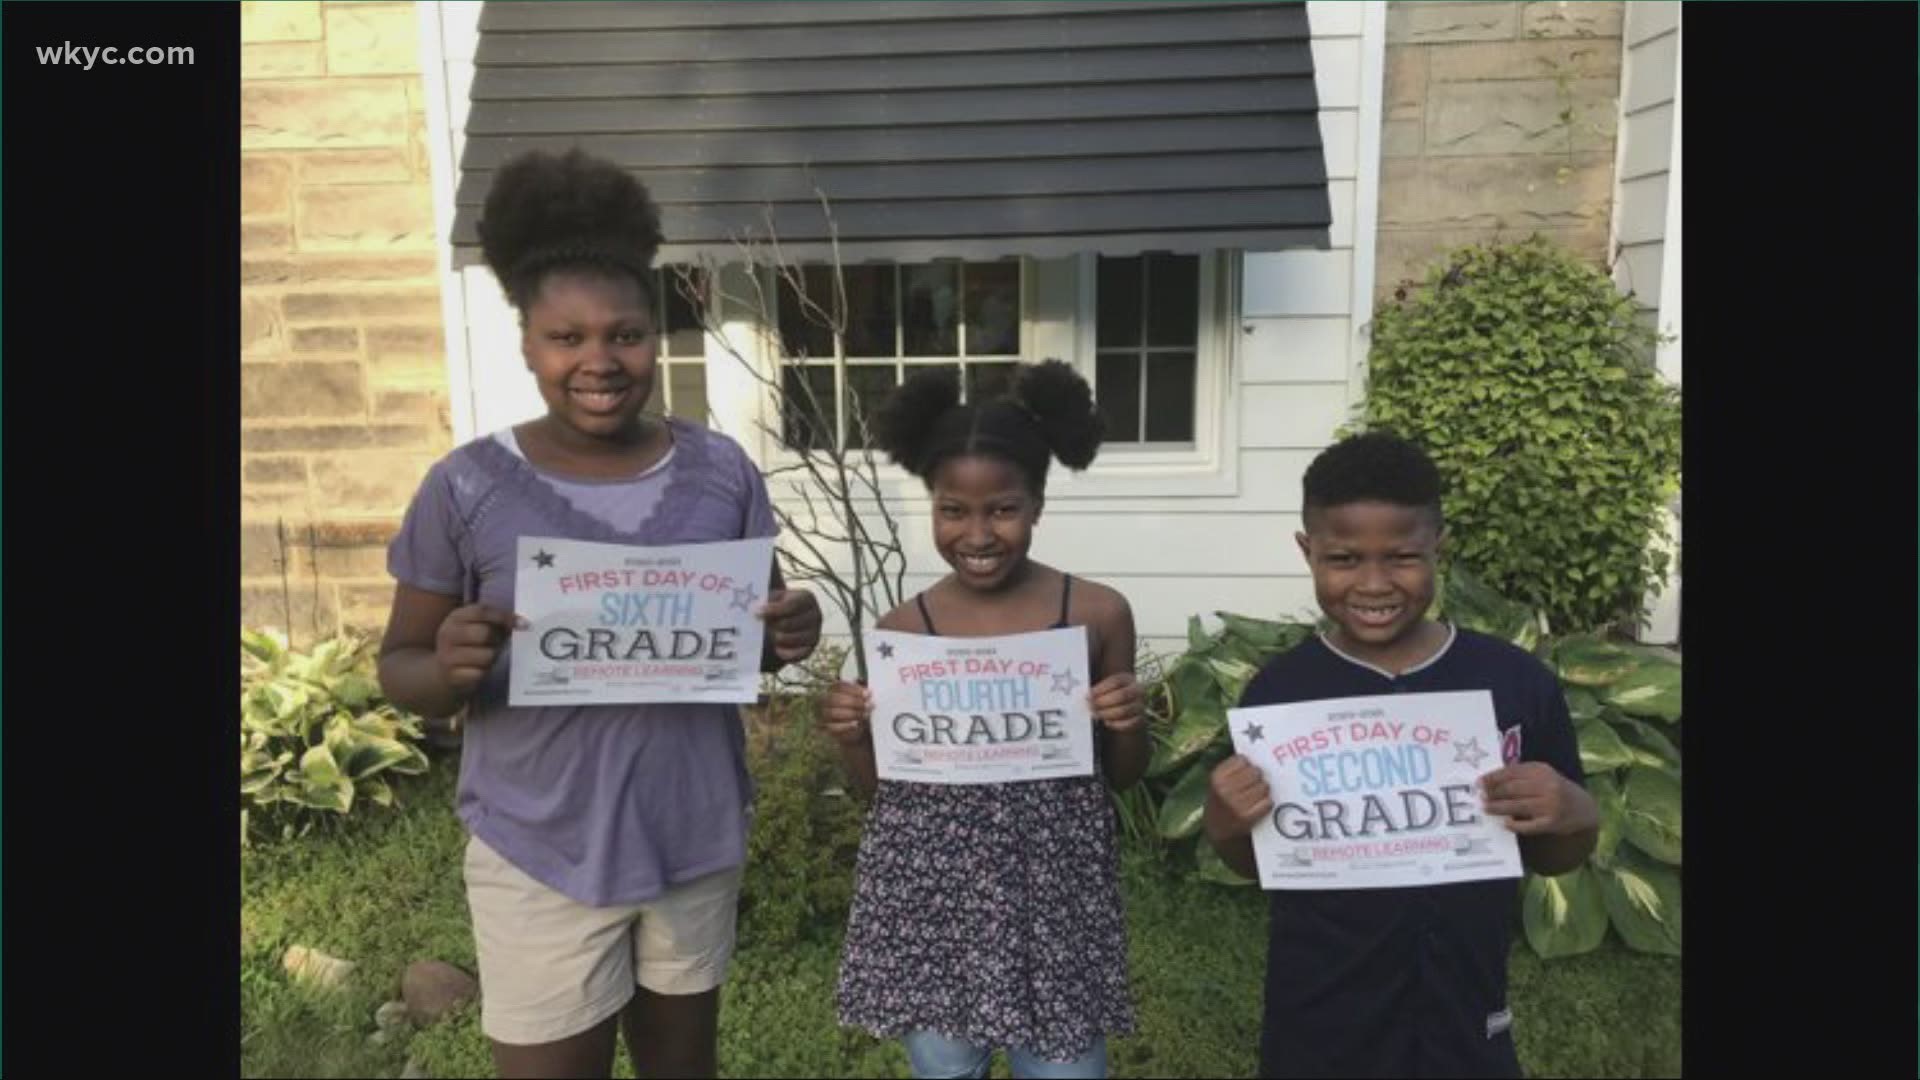 Whether your kids are learning at home or returning to the classroom, we want to see those back-to-school pics. Here are a few sent in by 3News viewers.